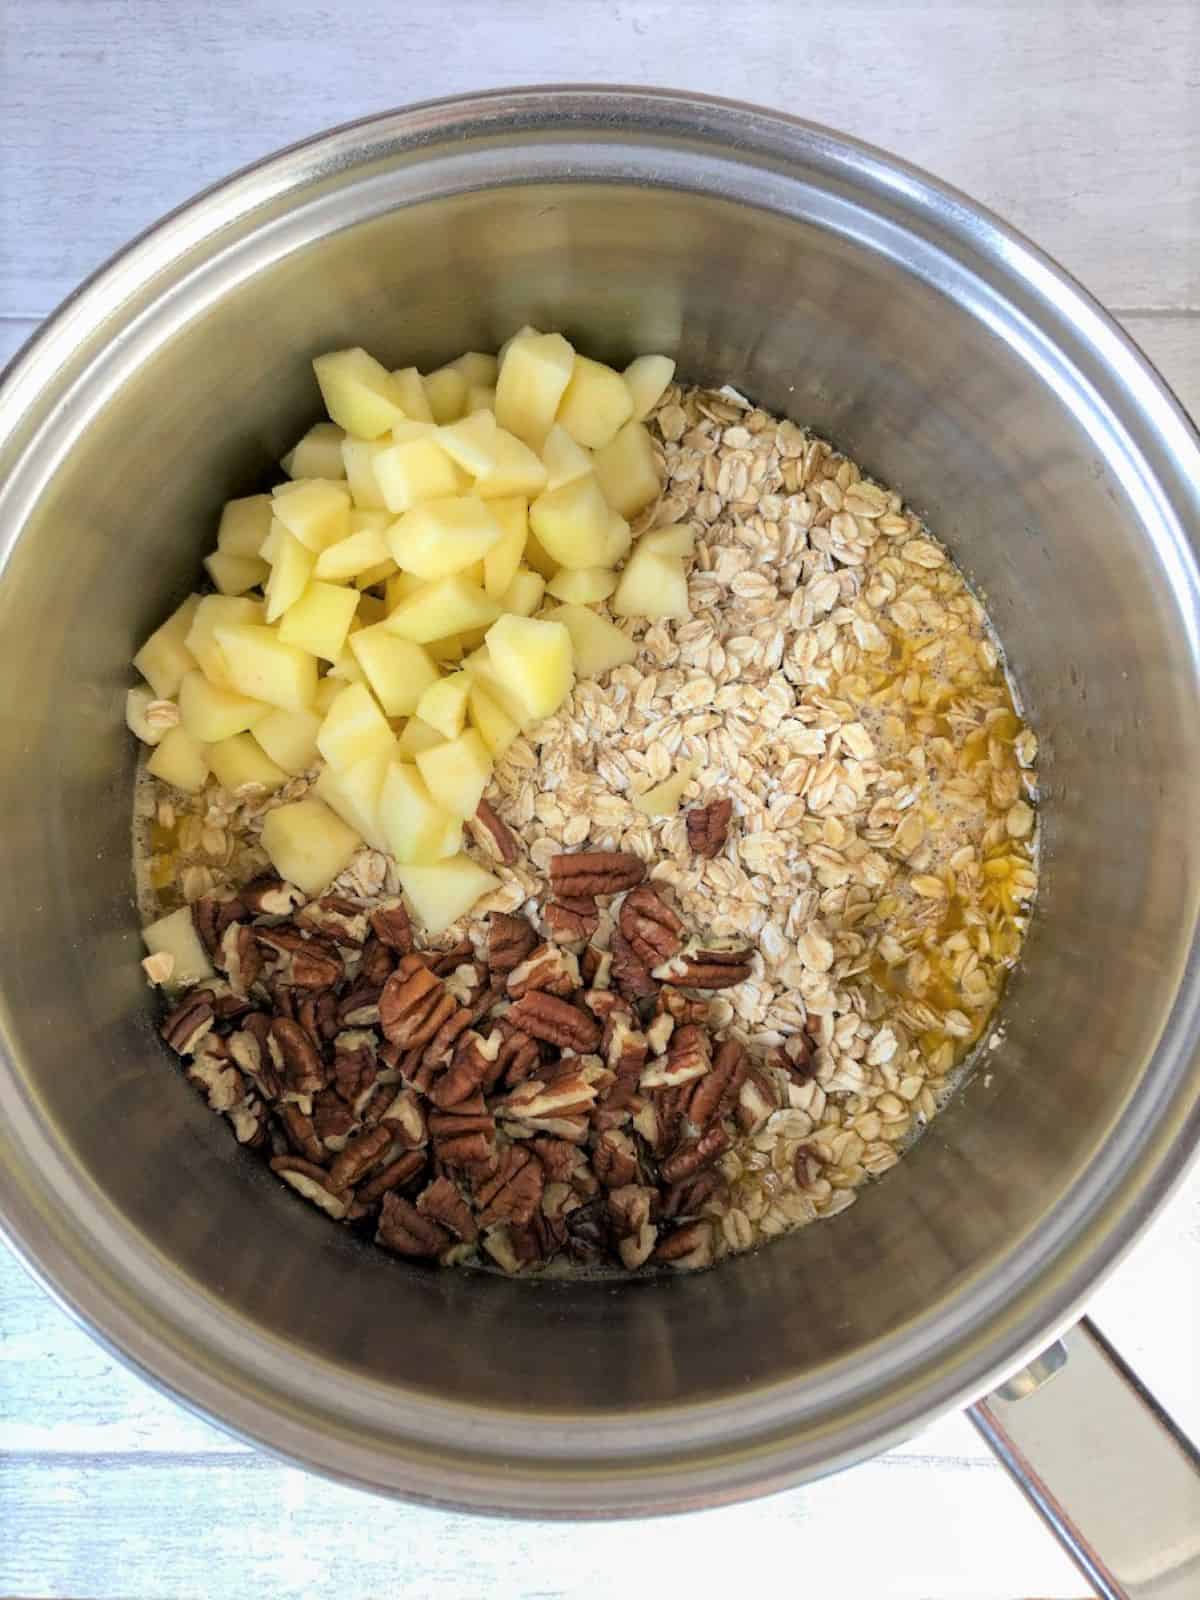 diced apple, peacan nuts, rolled oats added to butter and syrup in pan